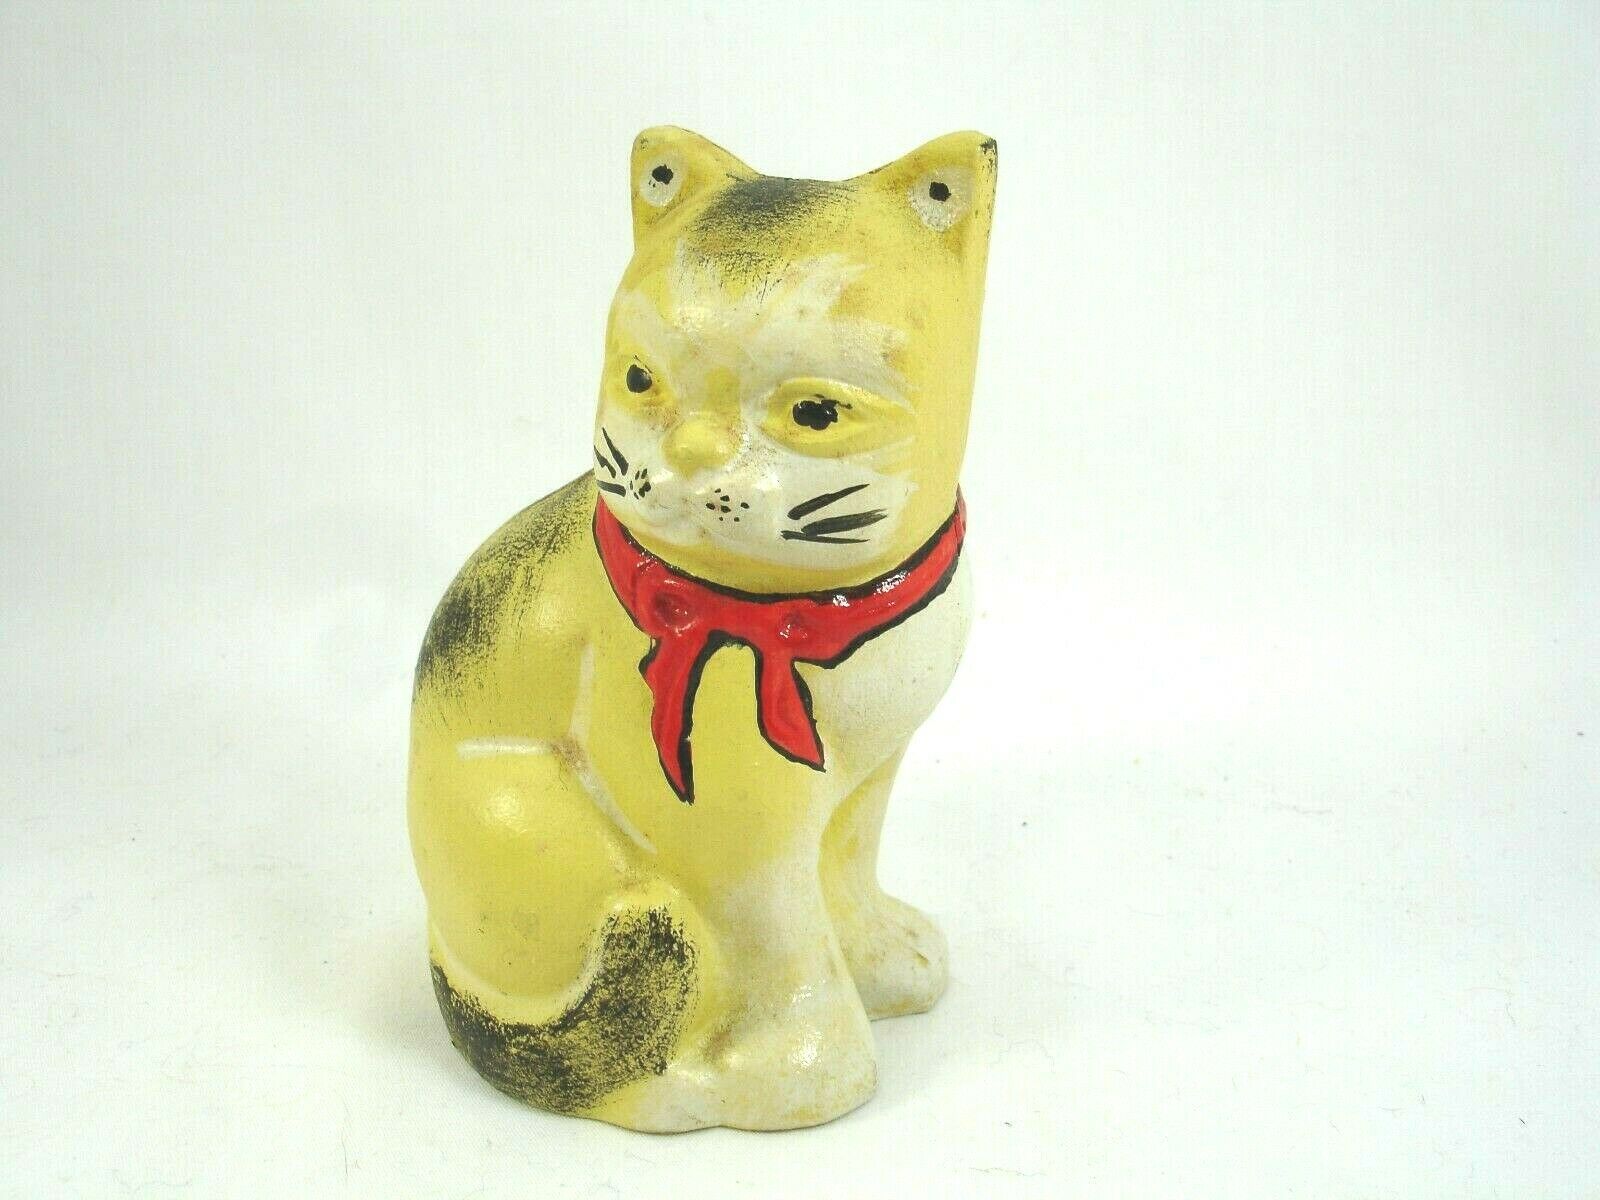 Vintage Metal Cat Or Kitty Bank, 4.5 Inches Tall, Painted, Tabby